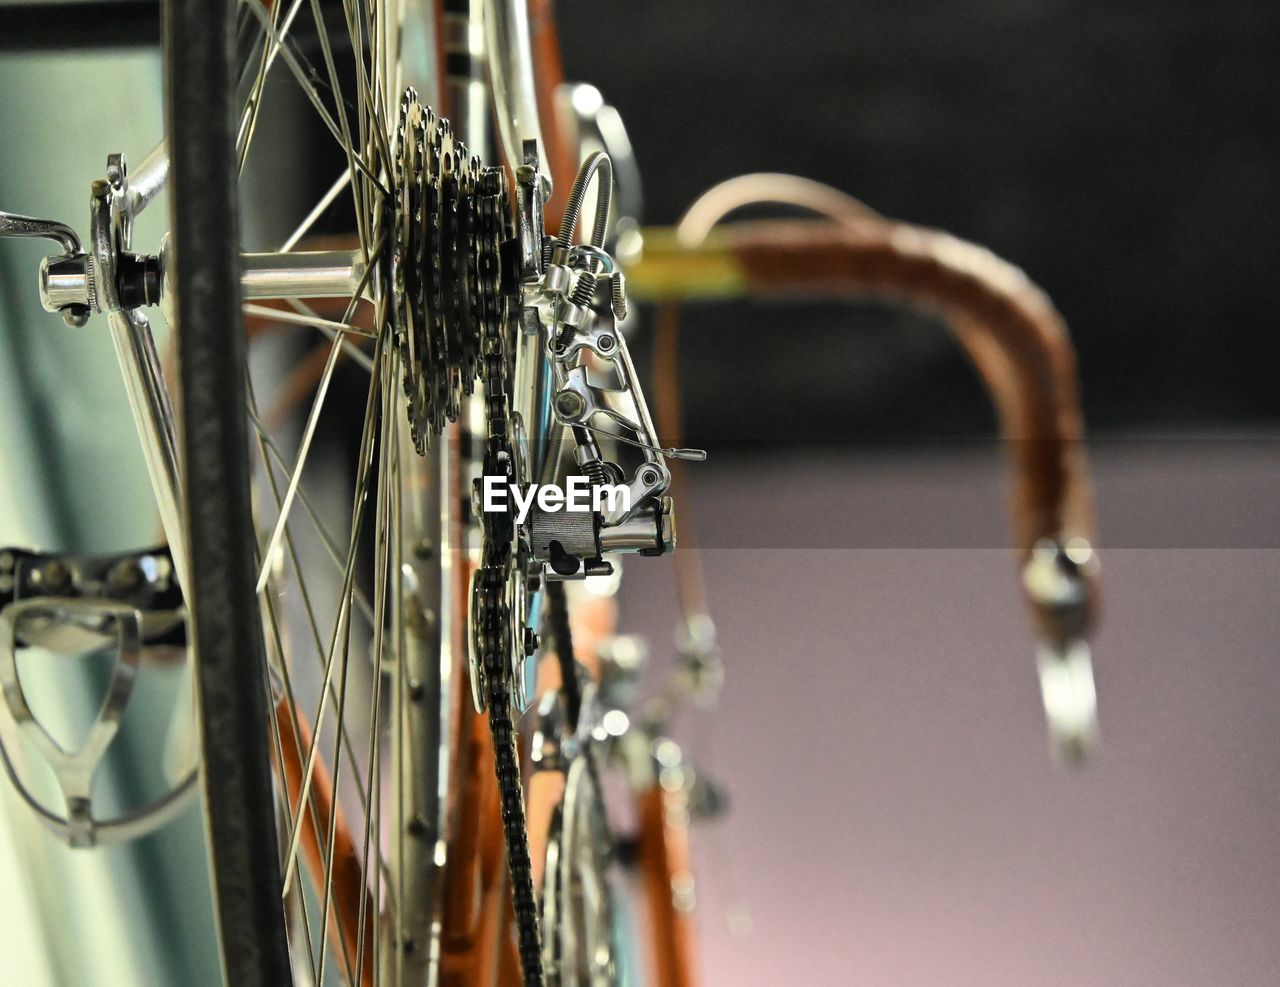 bicycle, vehicle, sports equipment, land vehicle, road bicycle, no people, close-up, focus on foreground, metal, wheel, indoors, transportation, selective focus, iron